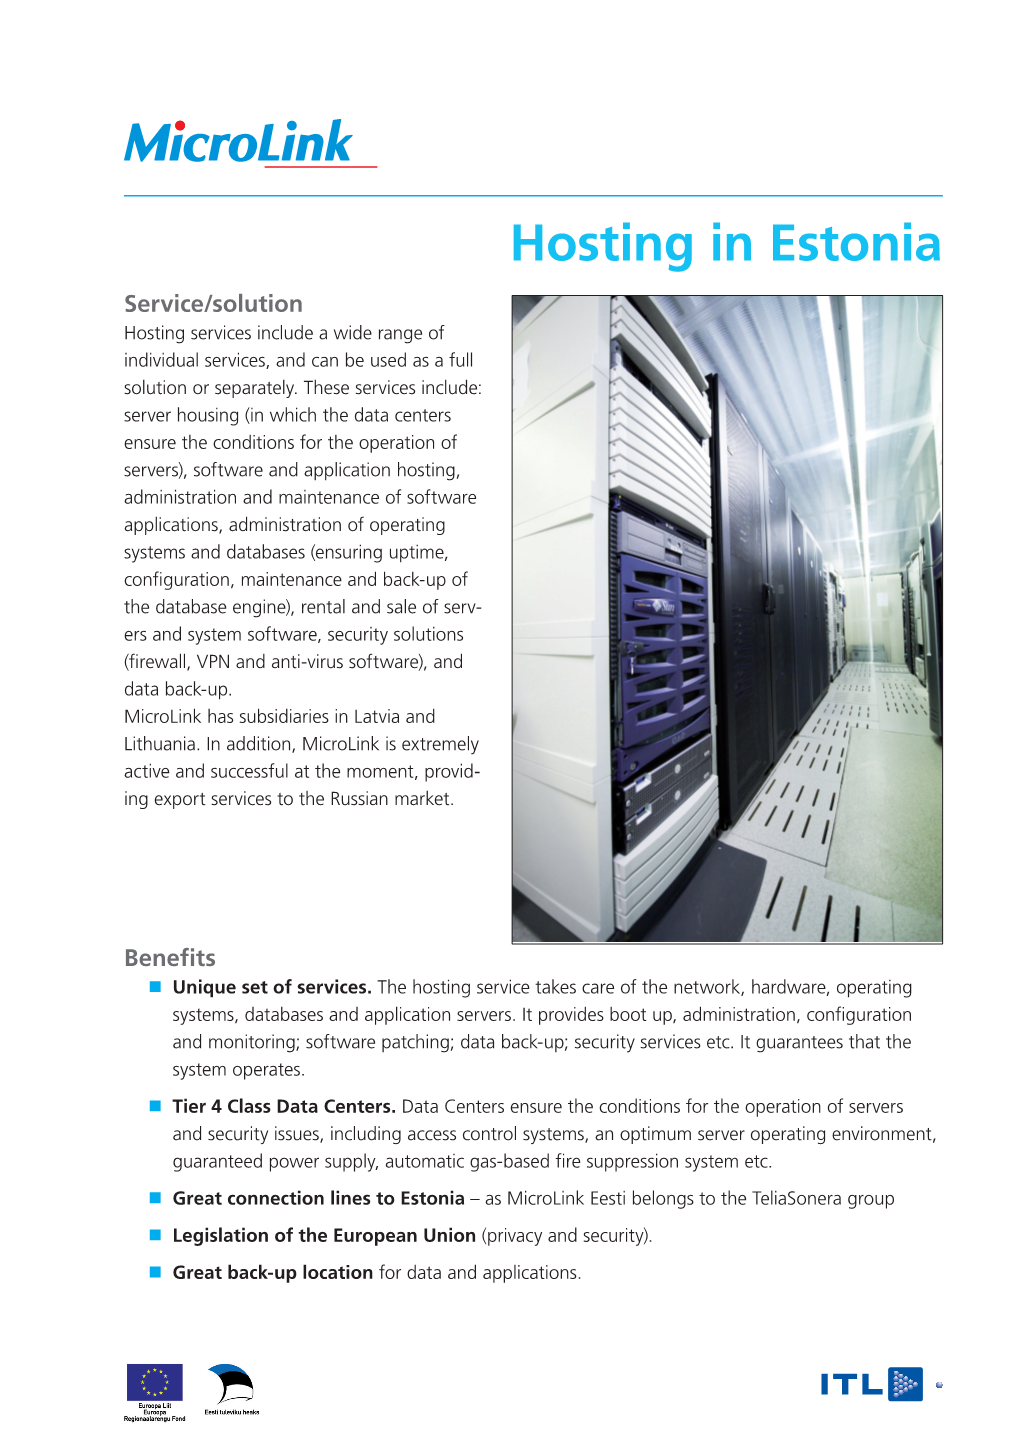 Hosting in Estonia Service/Solution Hosting Services Include a Wide Range of Individual Services, and Can Be Used As a Full Solution Or Separately